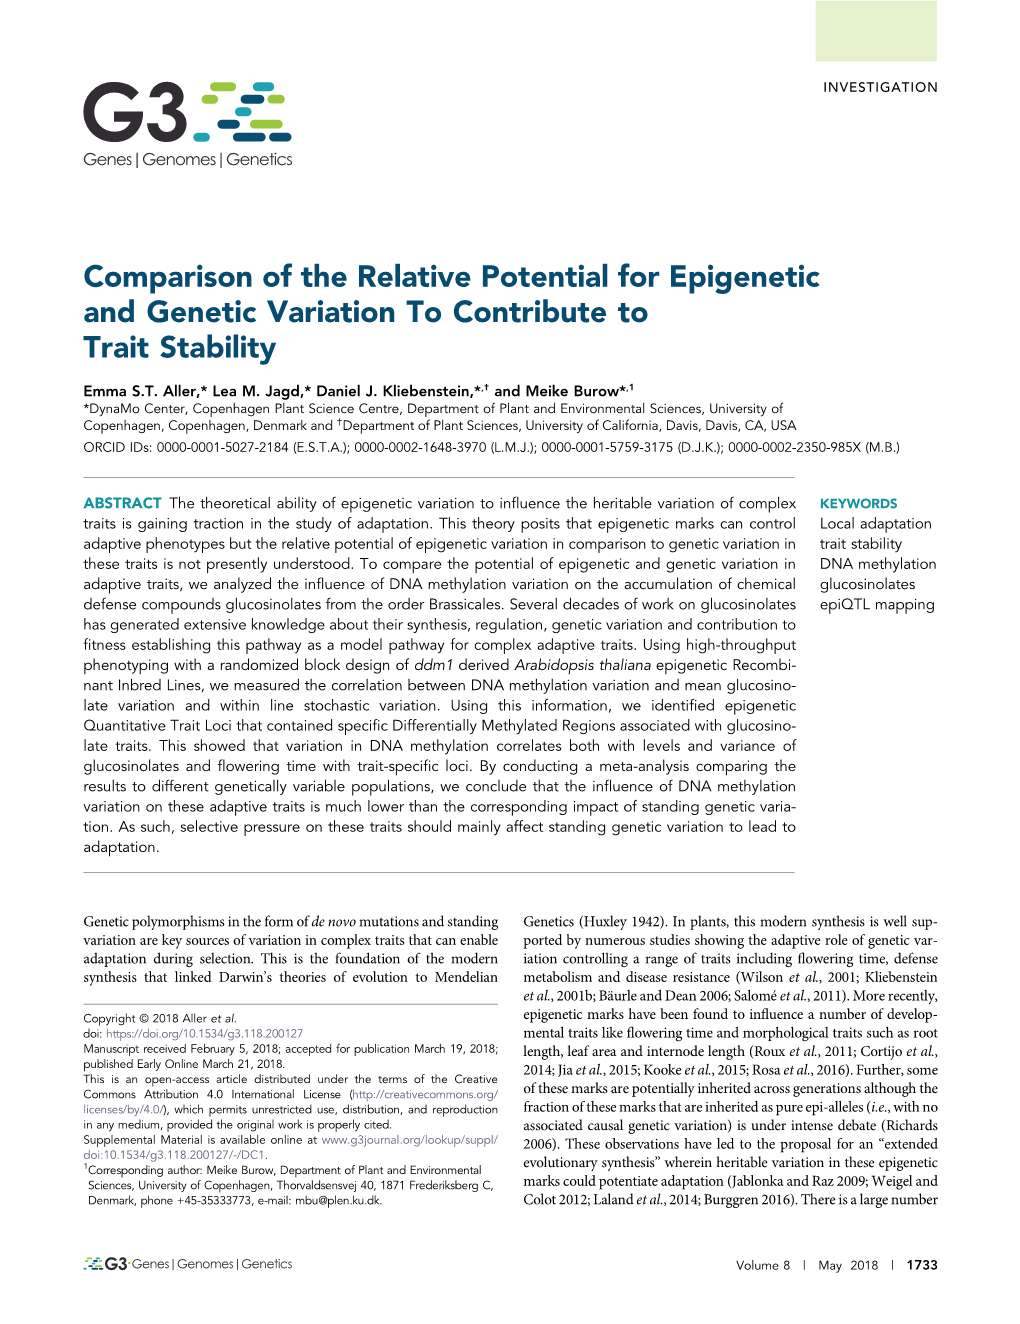 Comparison of the Relative Potential for Epigenetic and Genetic Variation to Contribute to Trait Stability